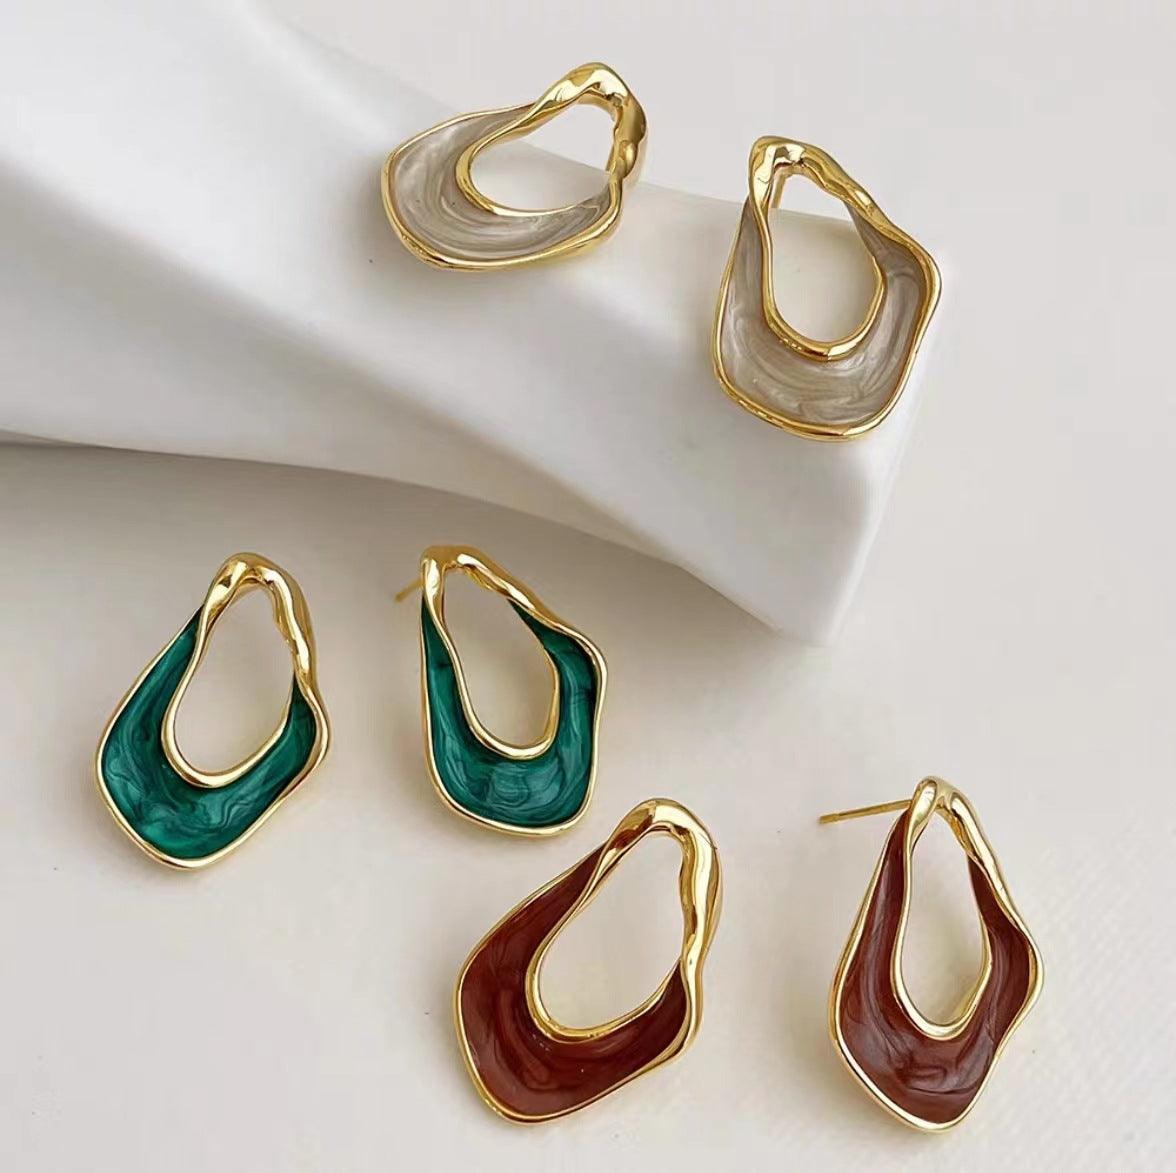 Twisted Simple Exquisite Korean New Fashion Earrings | MODE BY OH